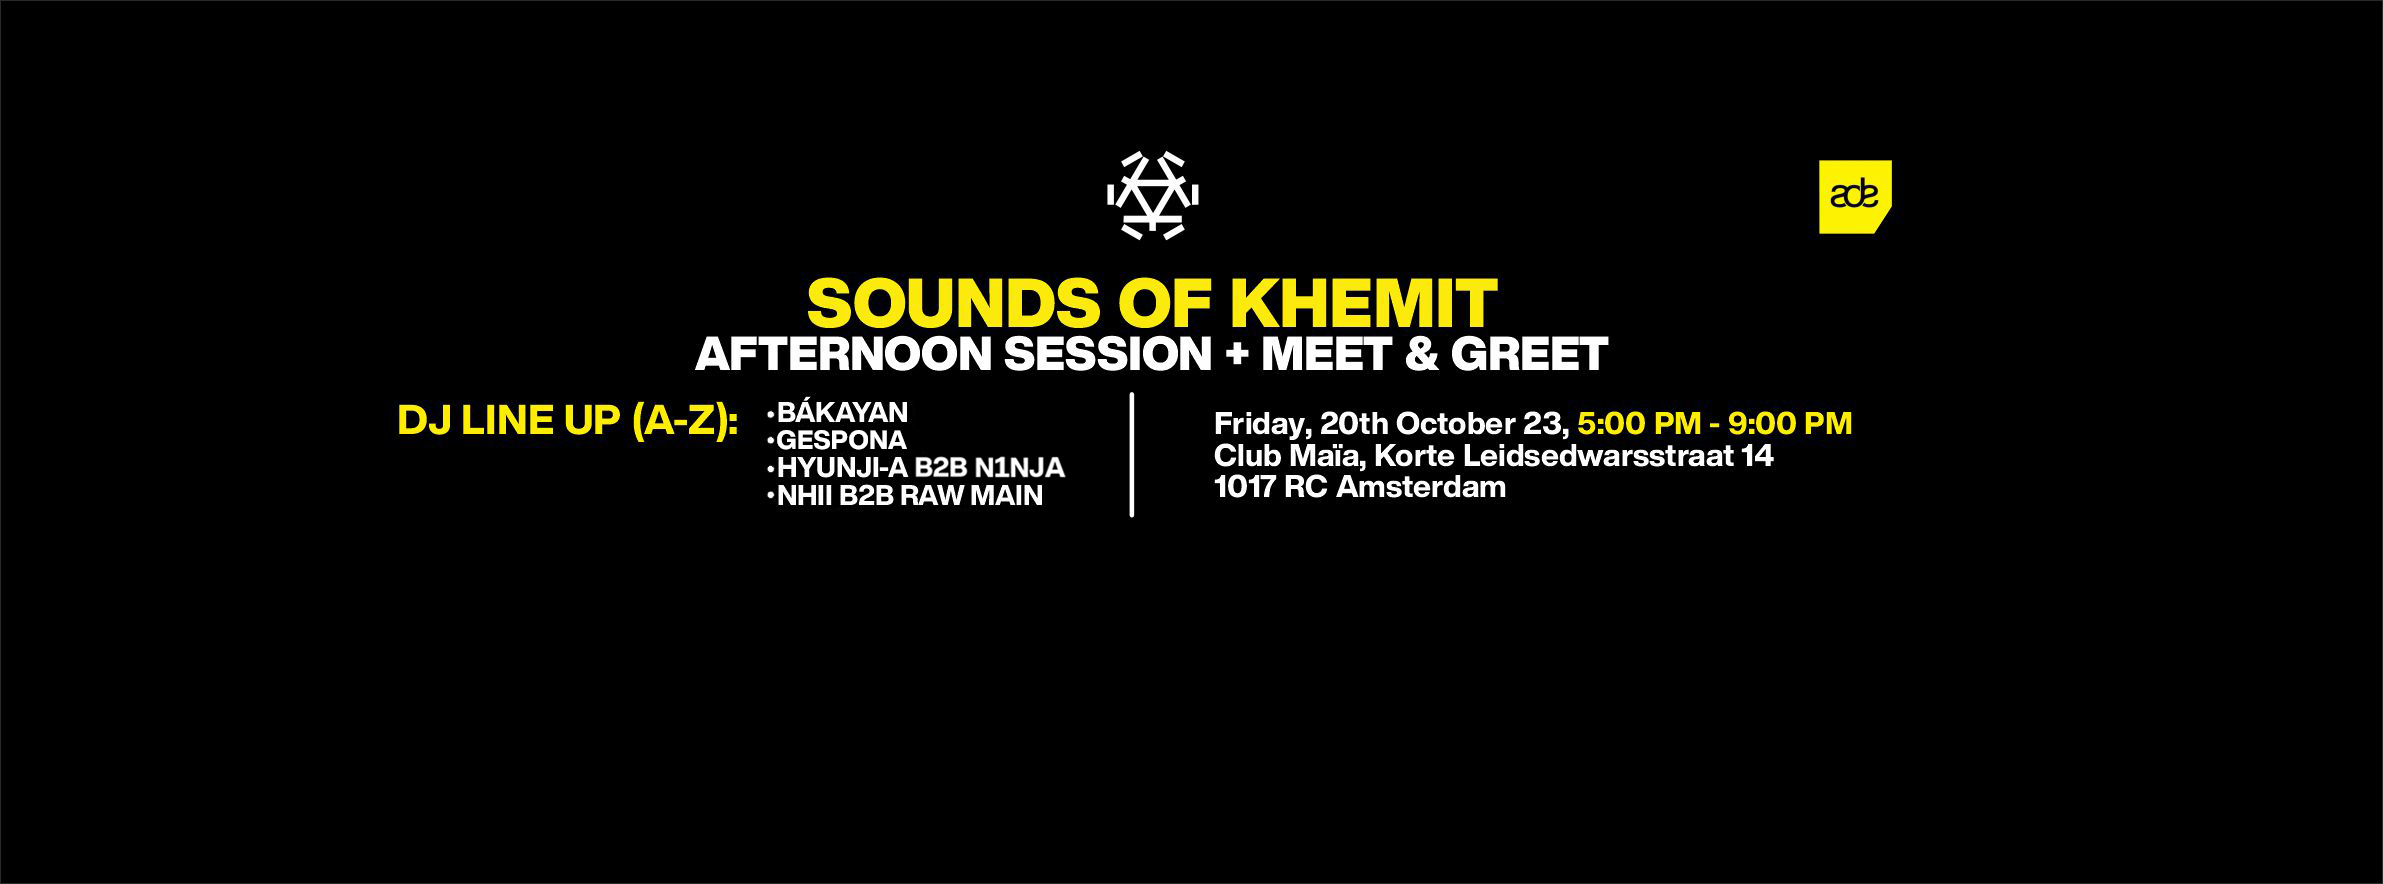 ADE Sounds of Khemit Afternoon Sessions + Meet & Greet - Página frontal